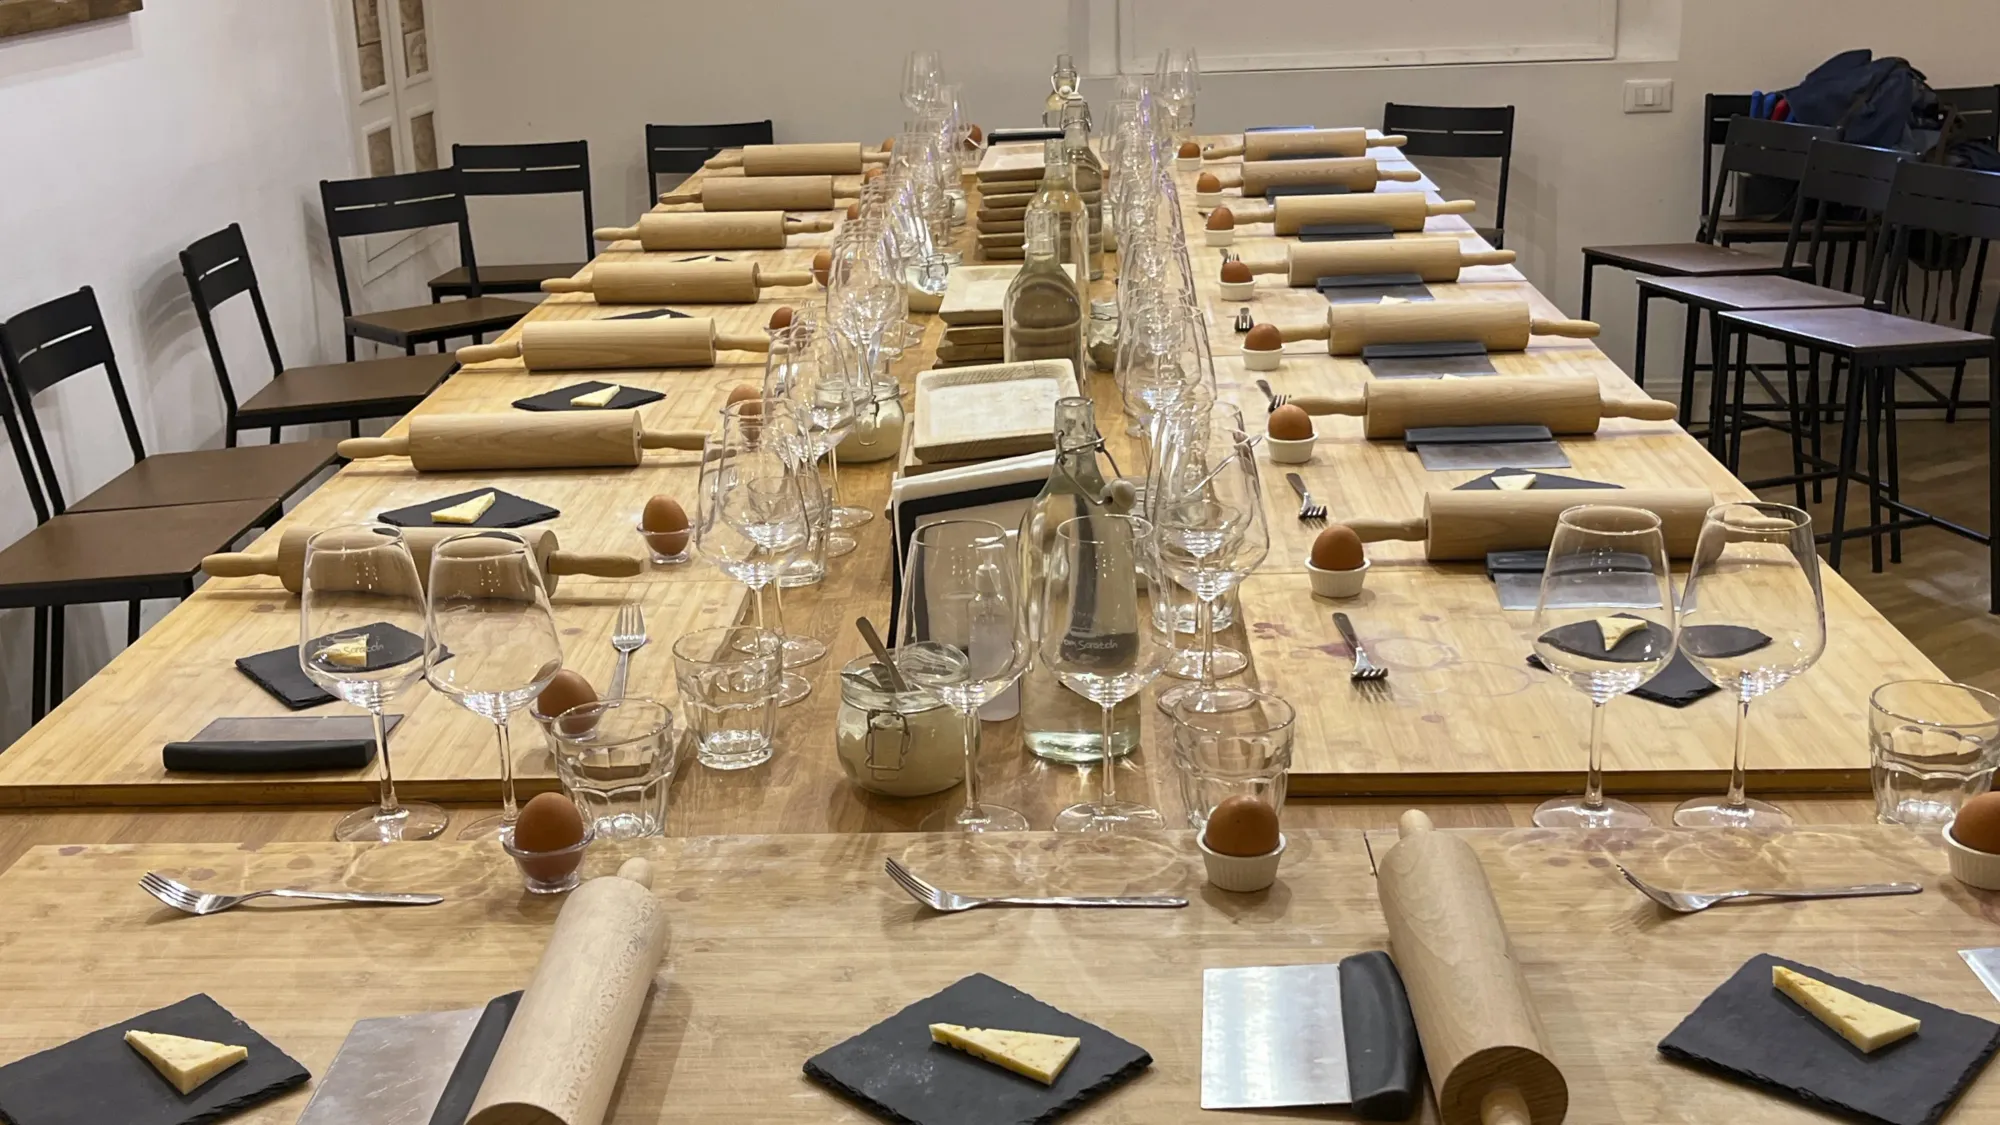 Table set for a pasta making class.